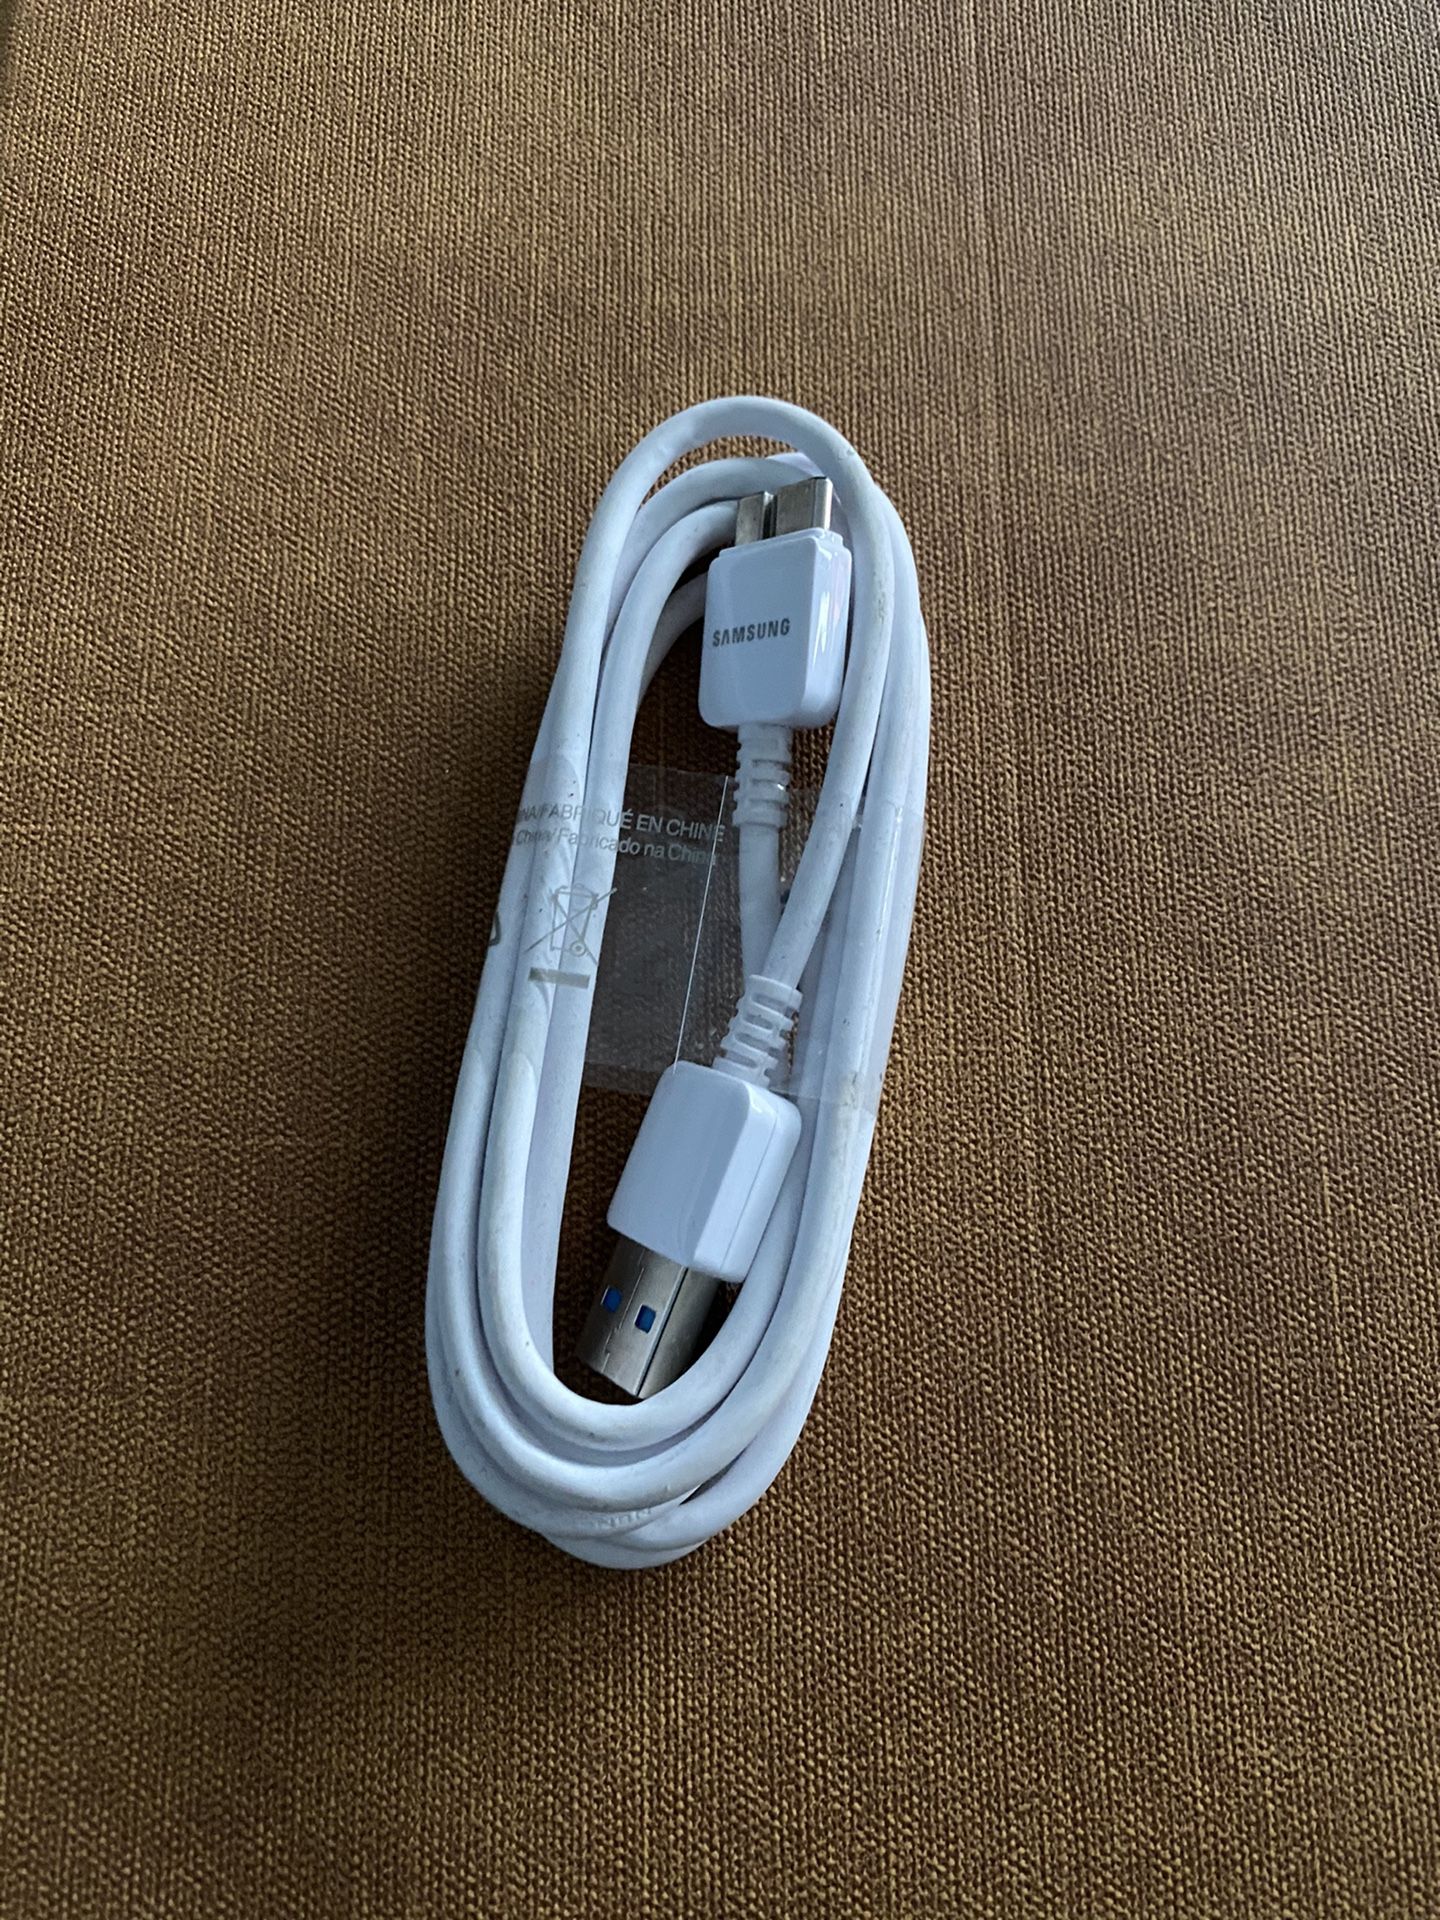 Samsung phone charger